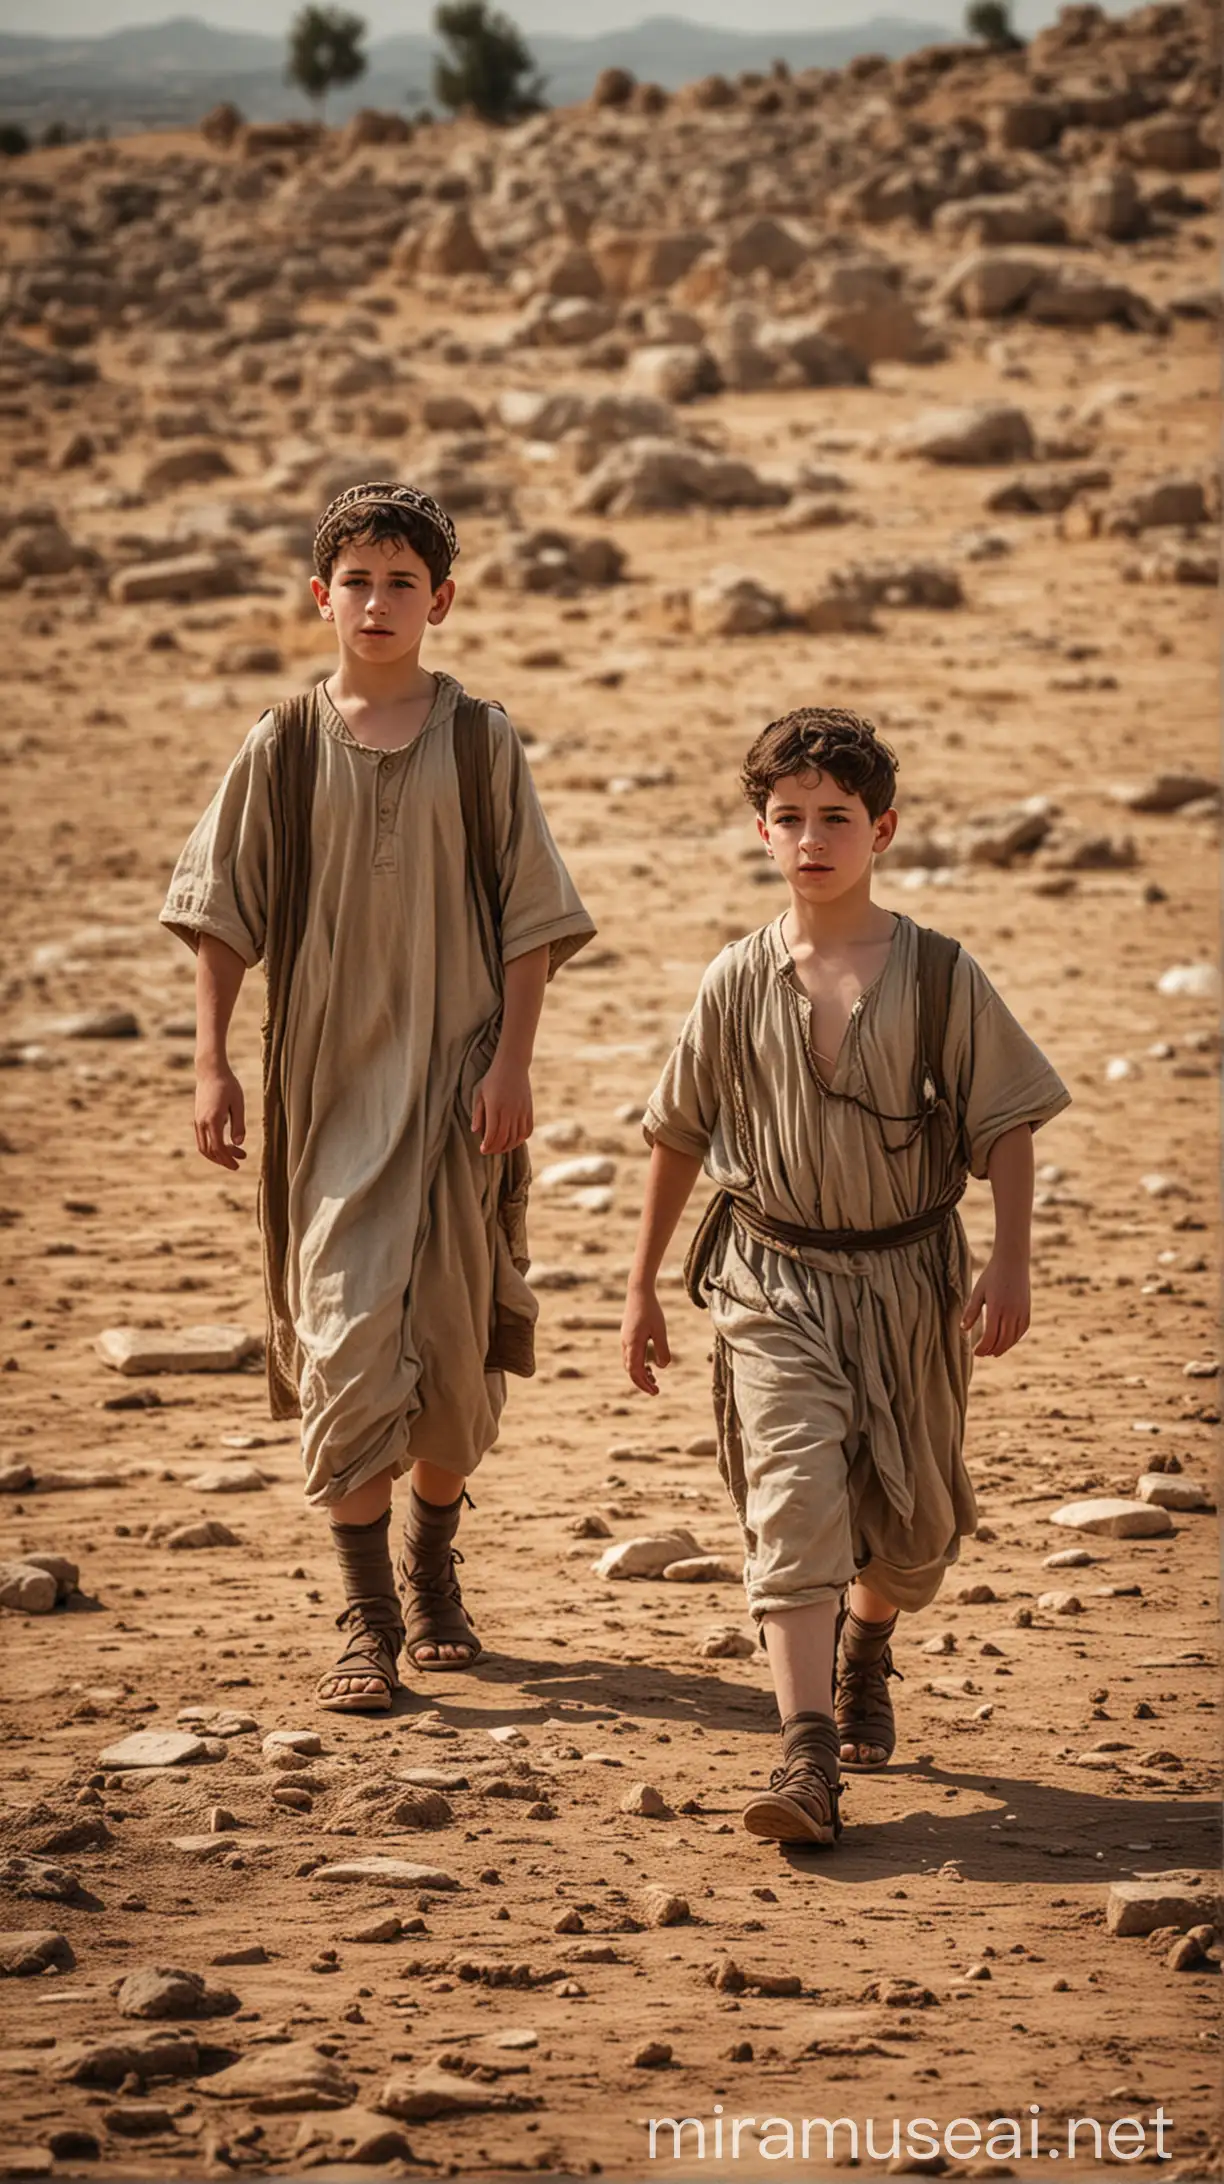 Ancient Jewish Boys in Field of Antiquity